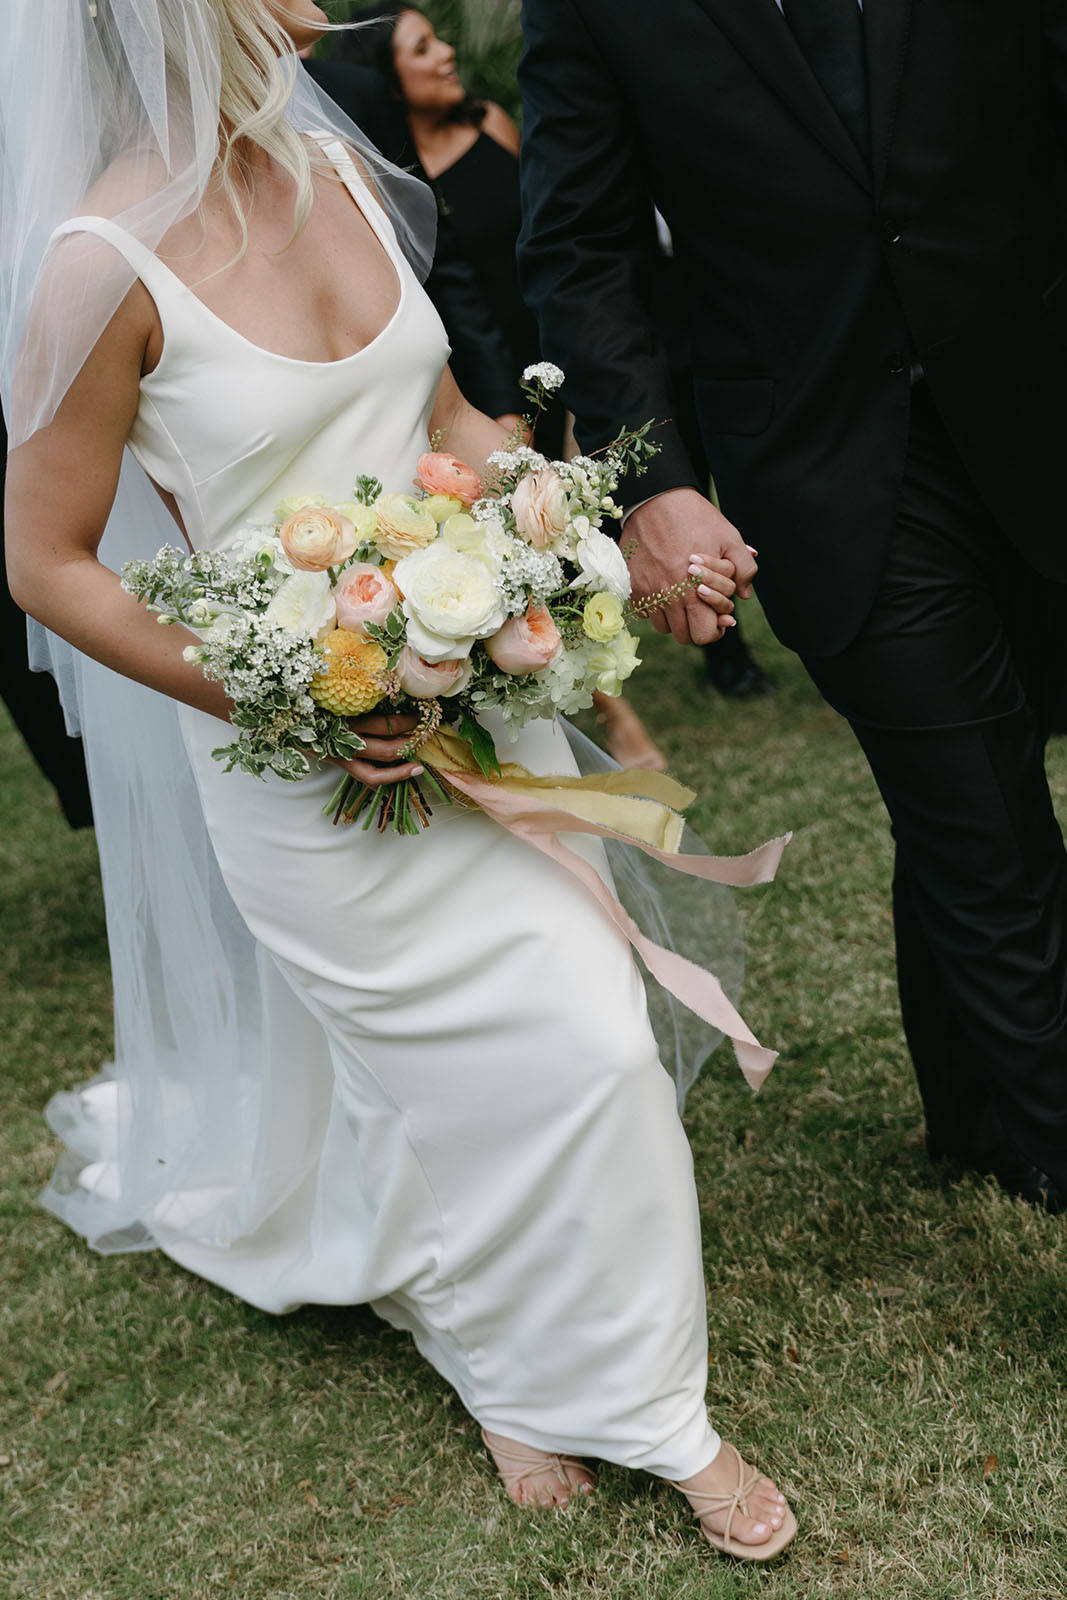 Close-up of the bride's radiant bouquet, elegantly held as she walks hand in hand with her new husband.